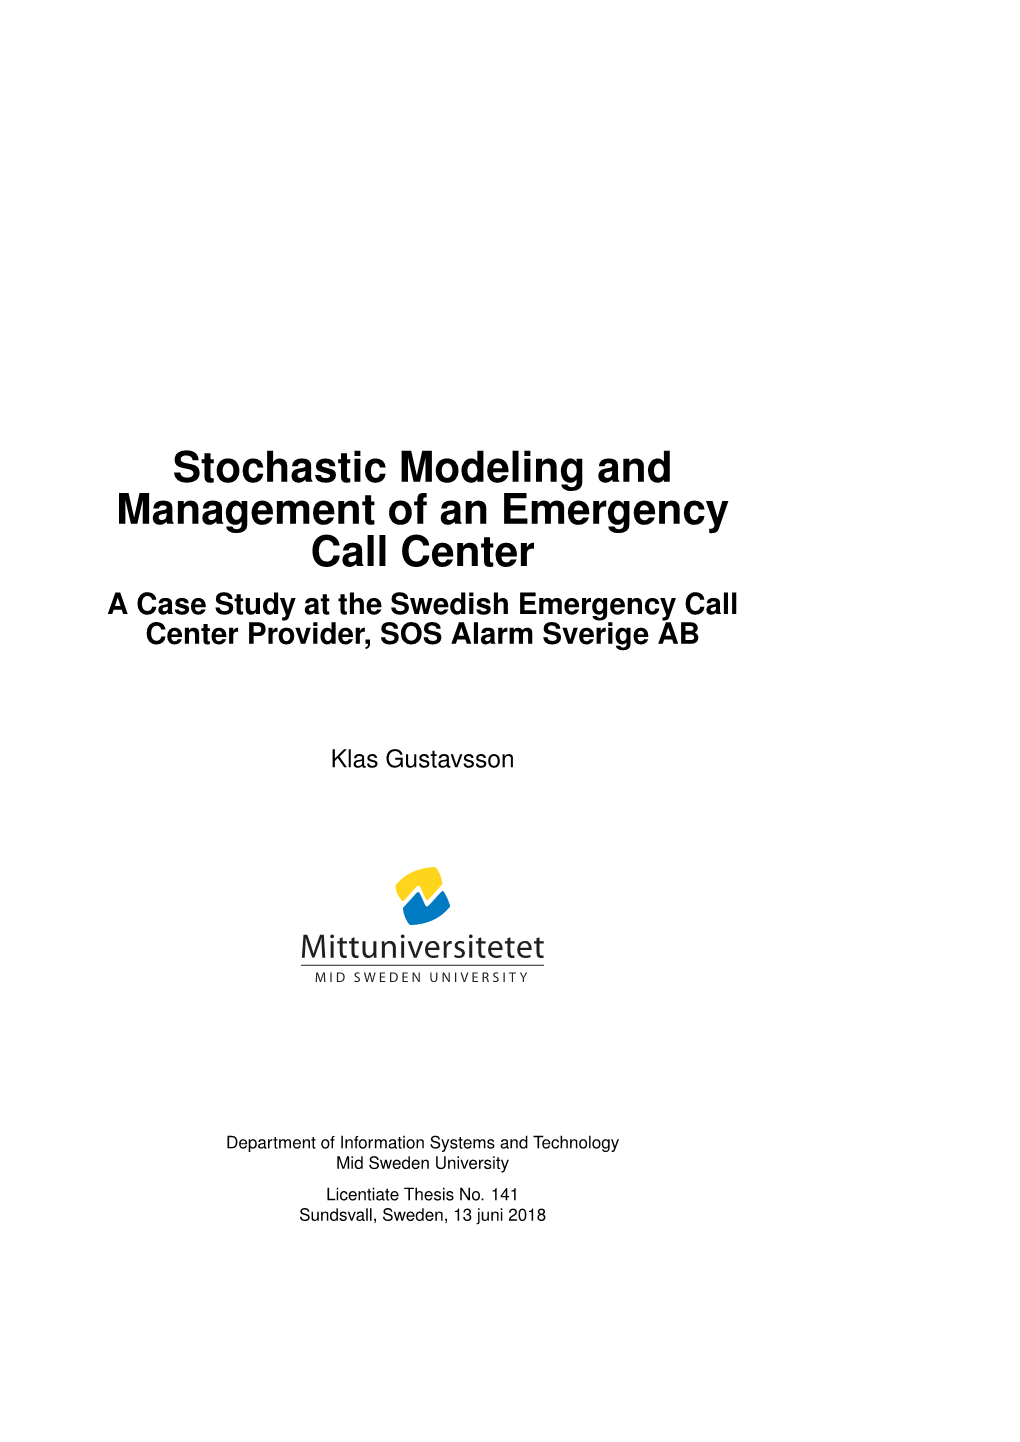 Stochastic Modeling and Management of an Emergency Call Center a Case Study at the Swedish Emergency Call Center Provider, SOS Alarm Sverige AB